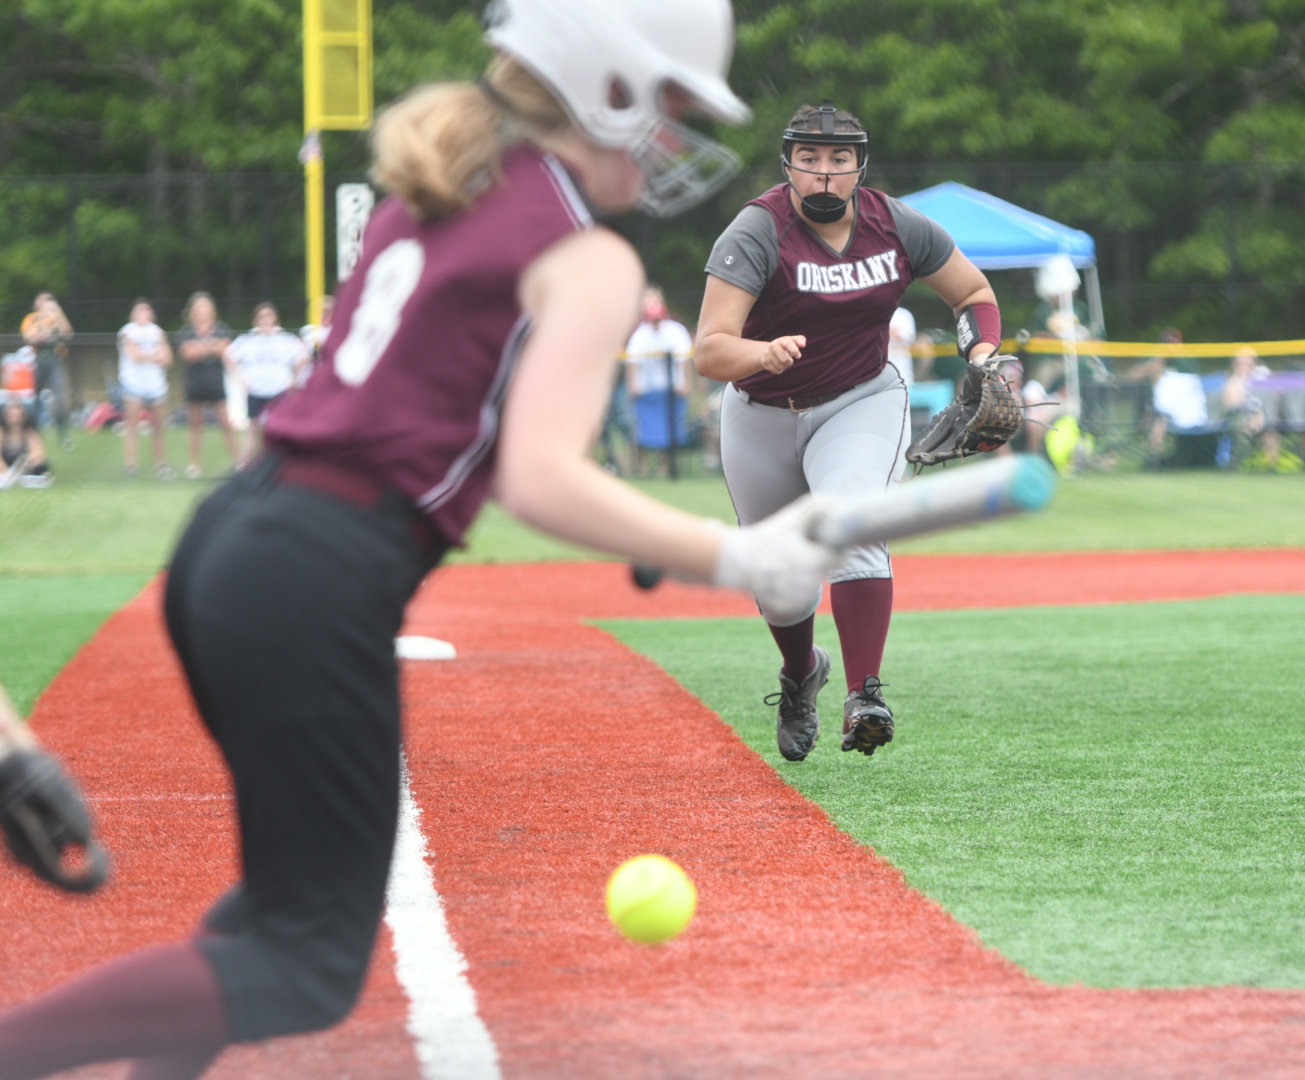 An Oriskany player tries to make a play during a state Class D game on Saturday on Long Island. Oriskany played in the state finals for the first time in program history. (Photo submitted by Michael Buehler)